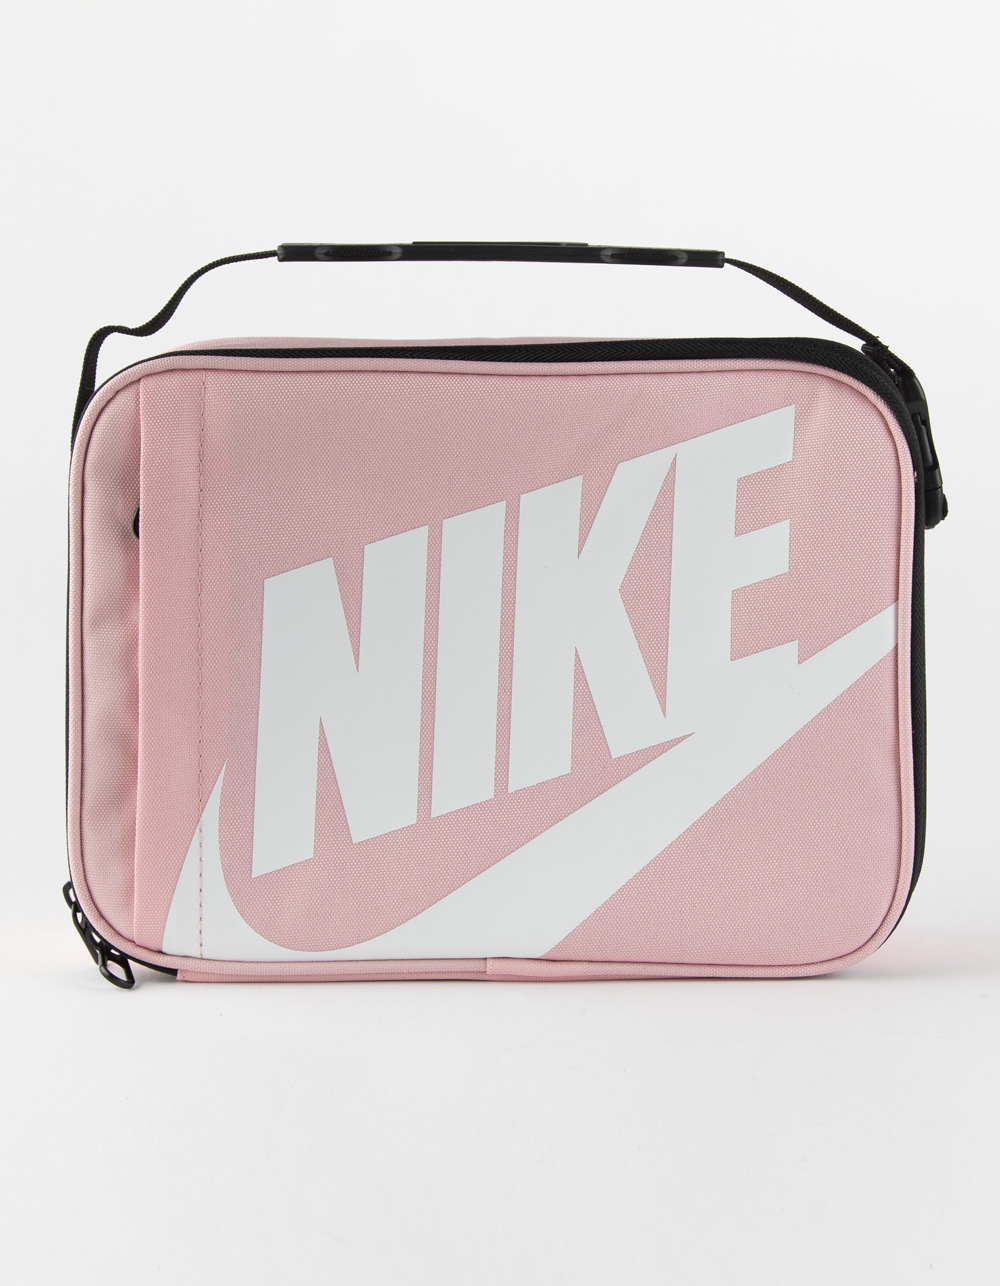 NIKE Futura Fuel Pack Lunch Bag